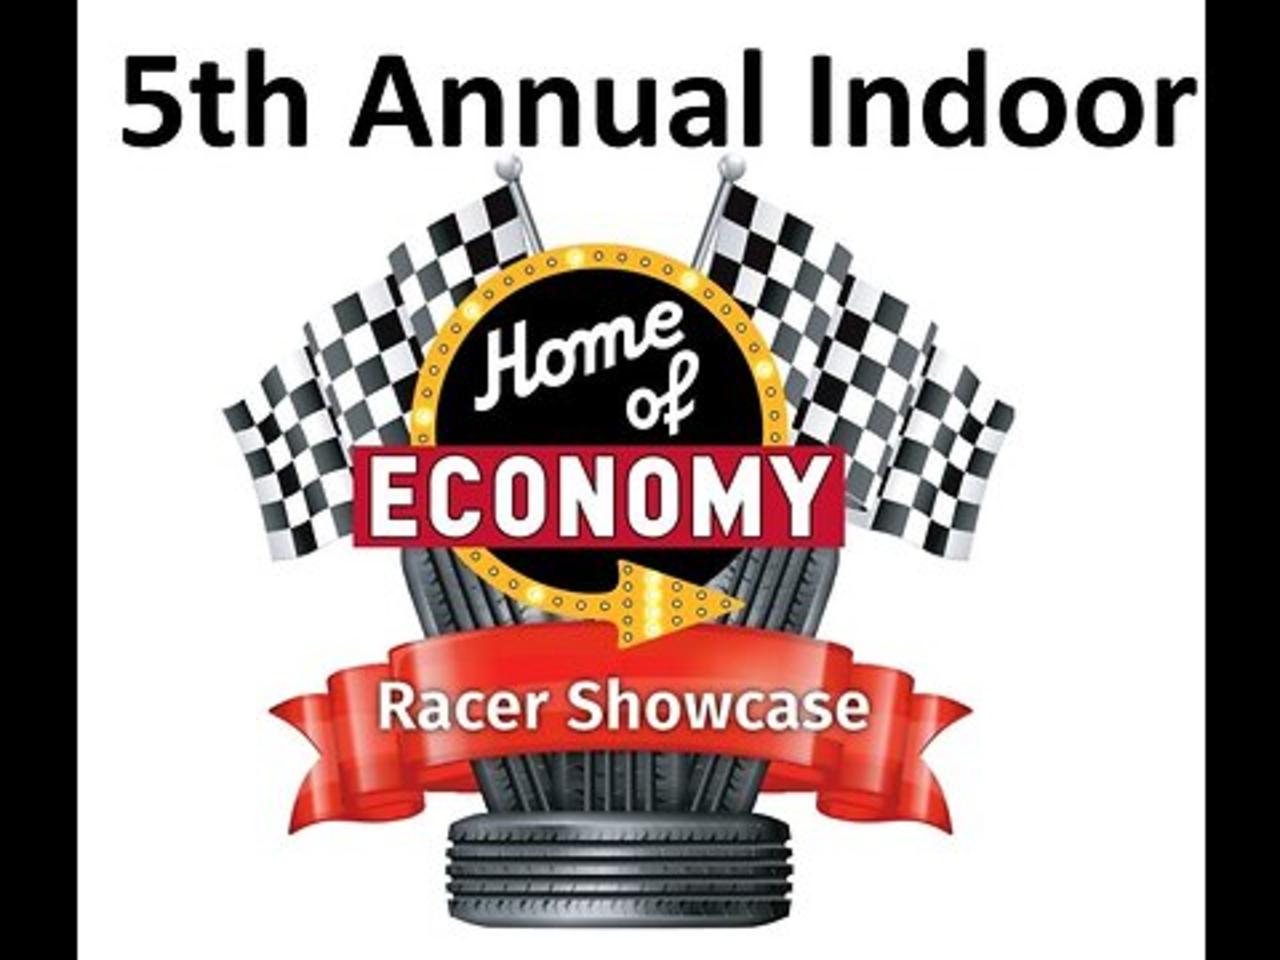 GFBS Live on Location: Home of Economy 5th Annual Indoor Racer Showcase Wrap-Up!